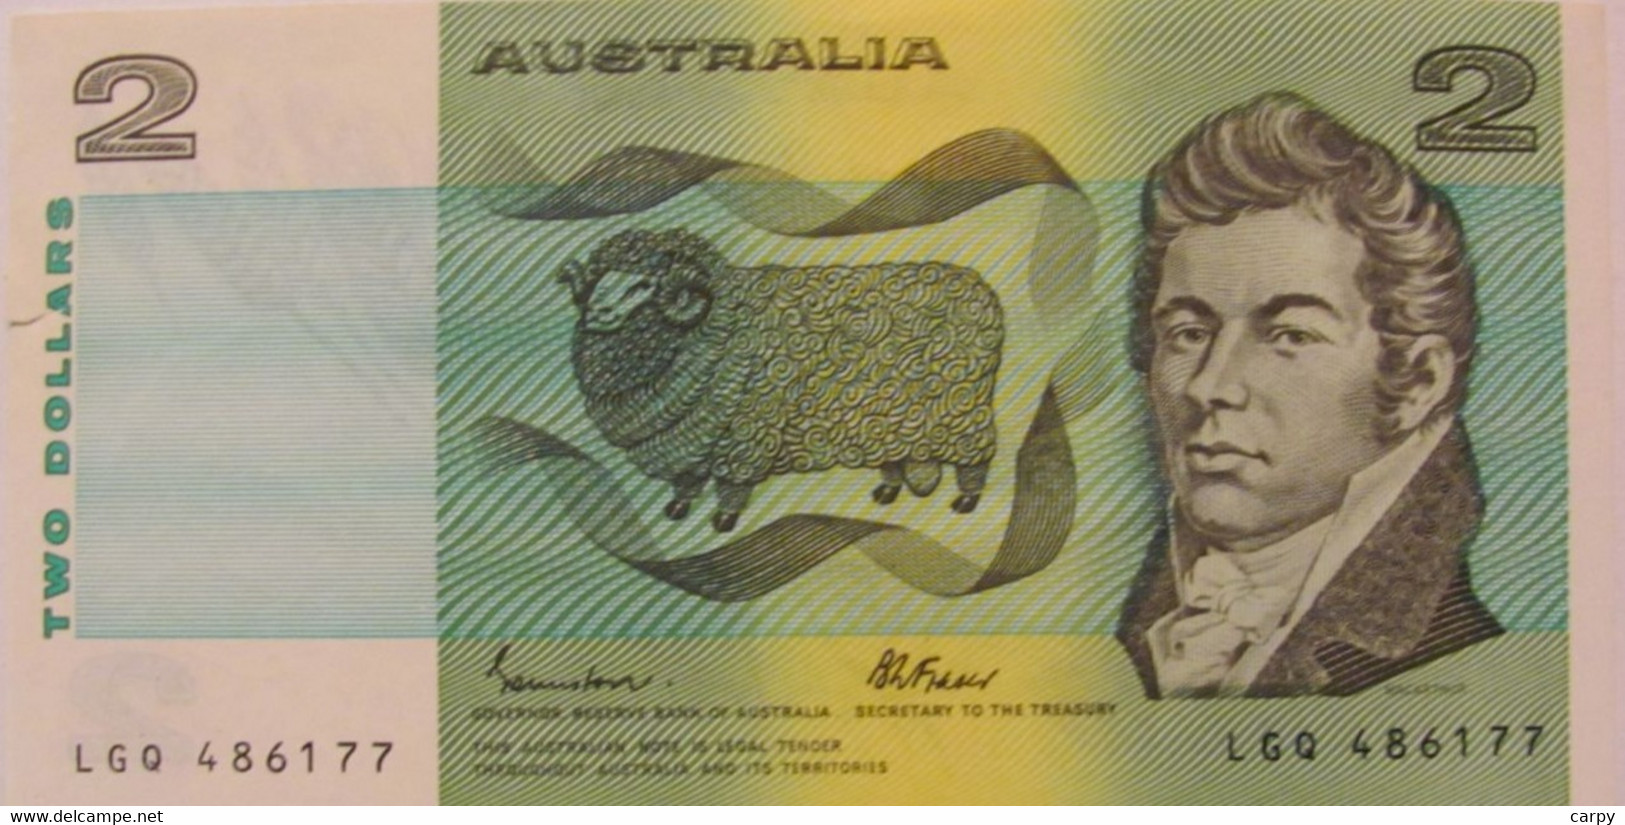 AUSTRALIA 2 Dollars 1985 / Signature Johnston & Fraser / Practically Is UNC, But Has A Small Marginal Tear At 21:00 Hour - 1974-94 Australia Reserve Bank (paper Notes)